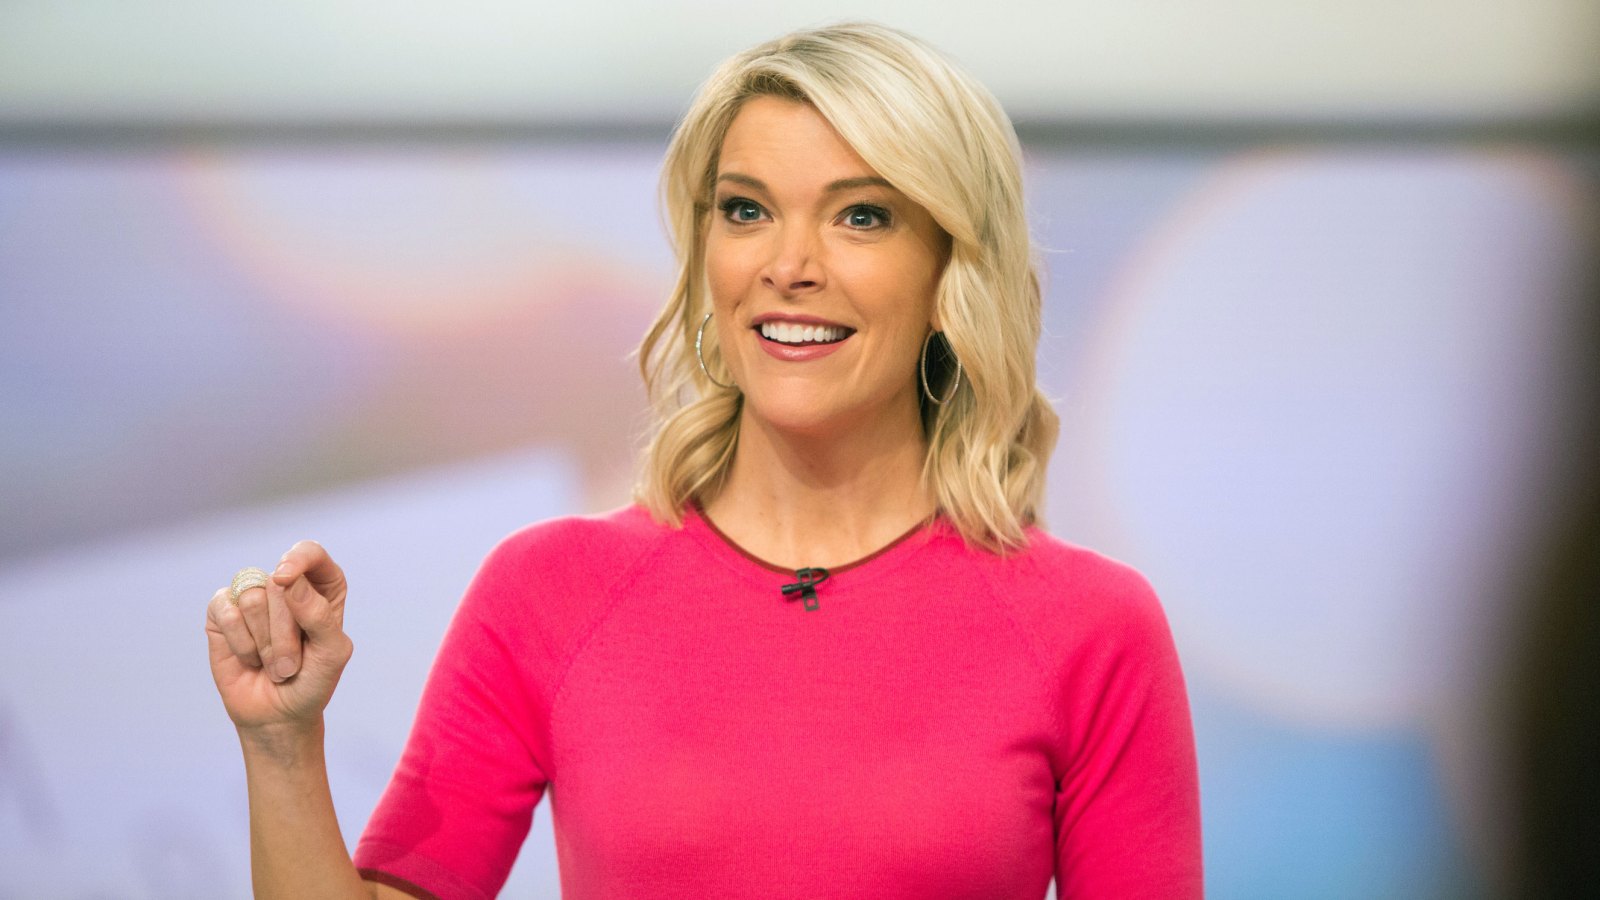 Megyn-Kelly- Reaches-Deal-With -NBC-2-Months-After-Exit